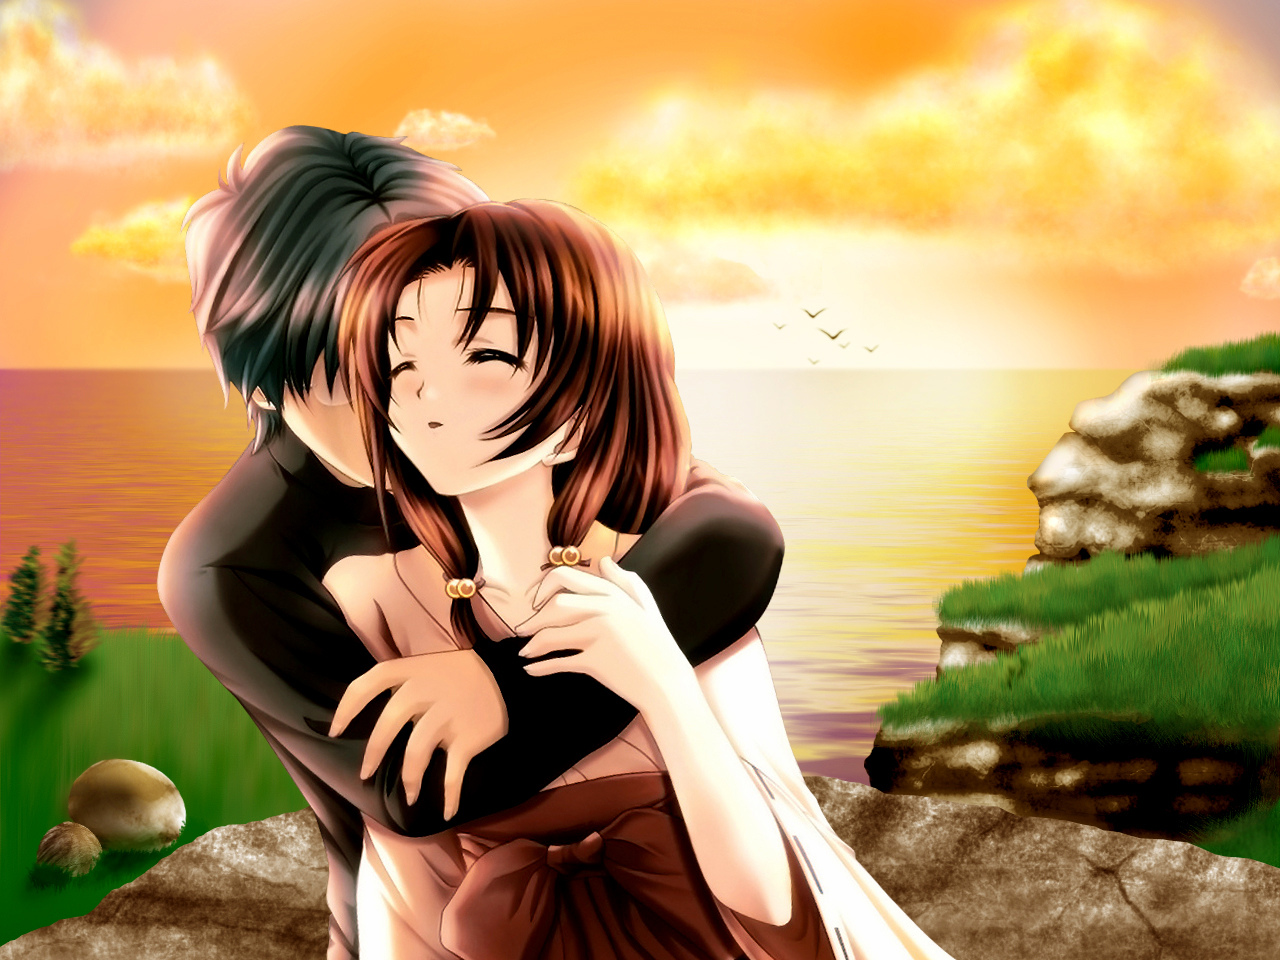  Romantic  Couples  Anime  Wallpapers  Romantic  Wallpapers  